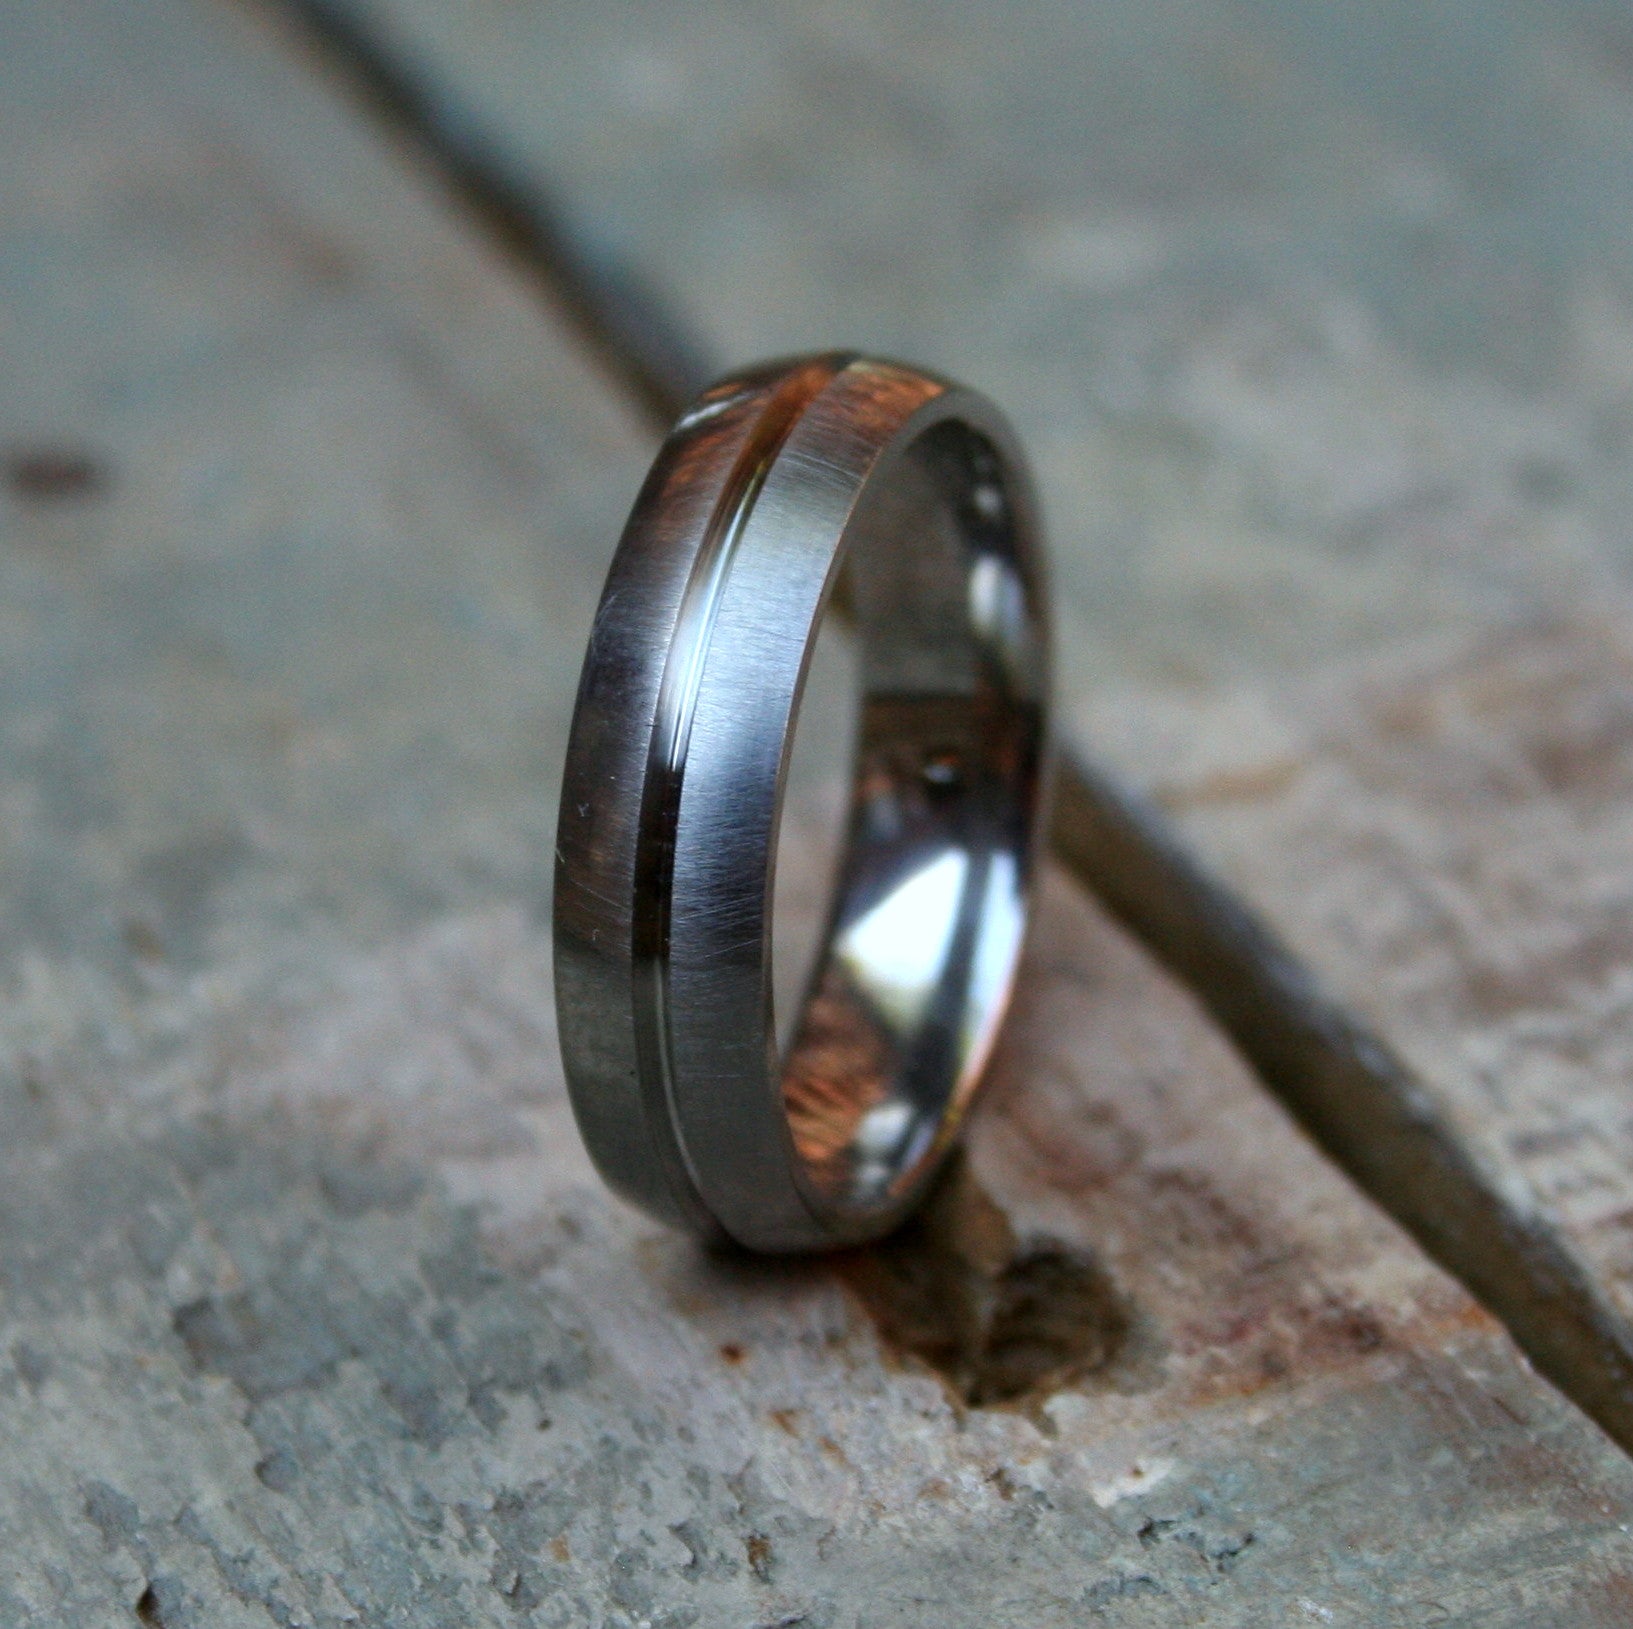 6mm Titanium D shape band with a groove cut into the metal. The ring is made with a brushed finish and a comfort fit on the inside. The groove has a polished finish.